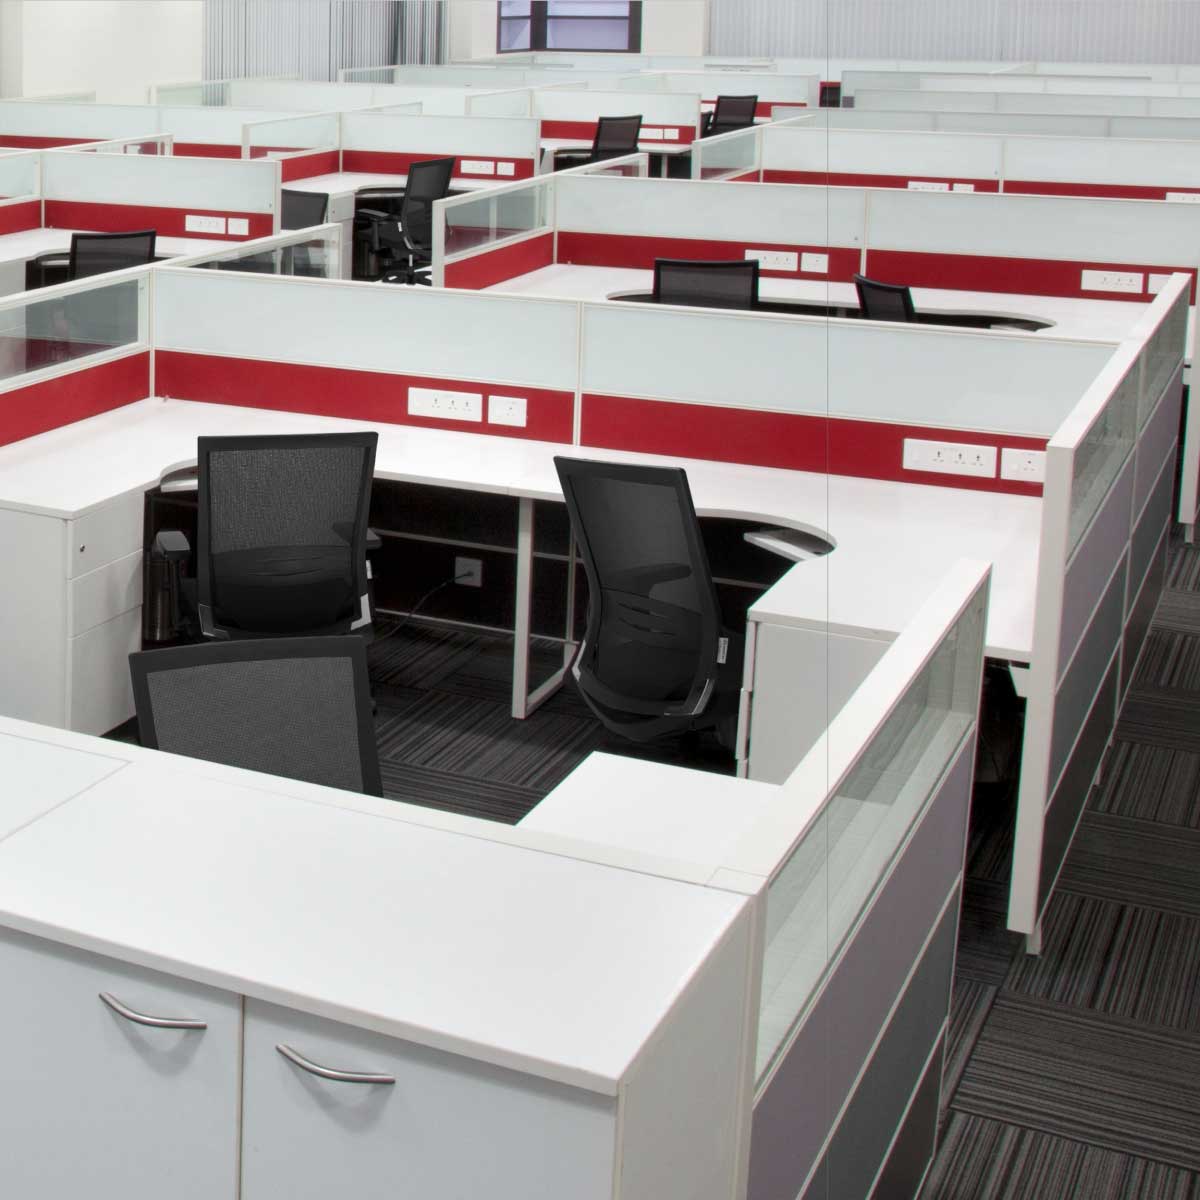 Computer Workstation Furniture Manufacturers, Suppliers in Noida Sector 134